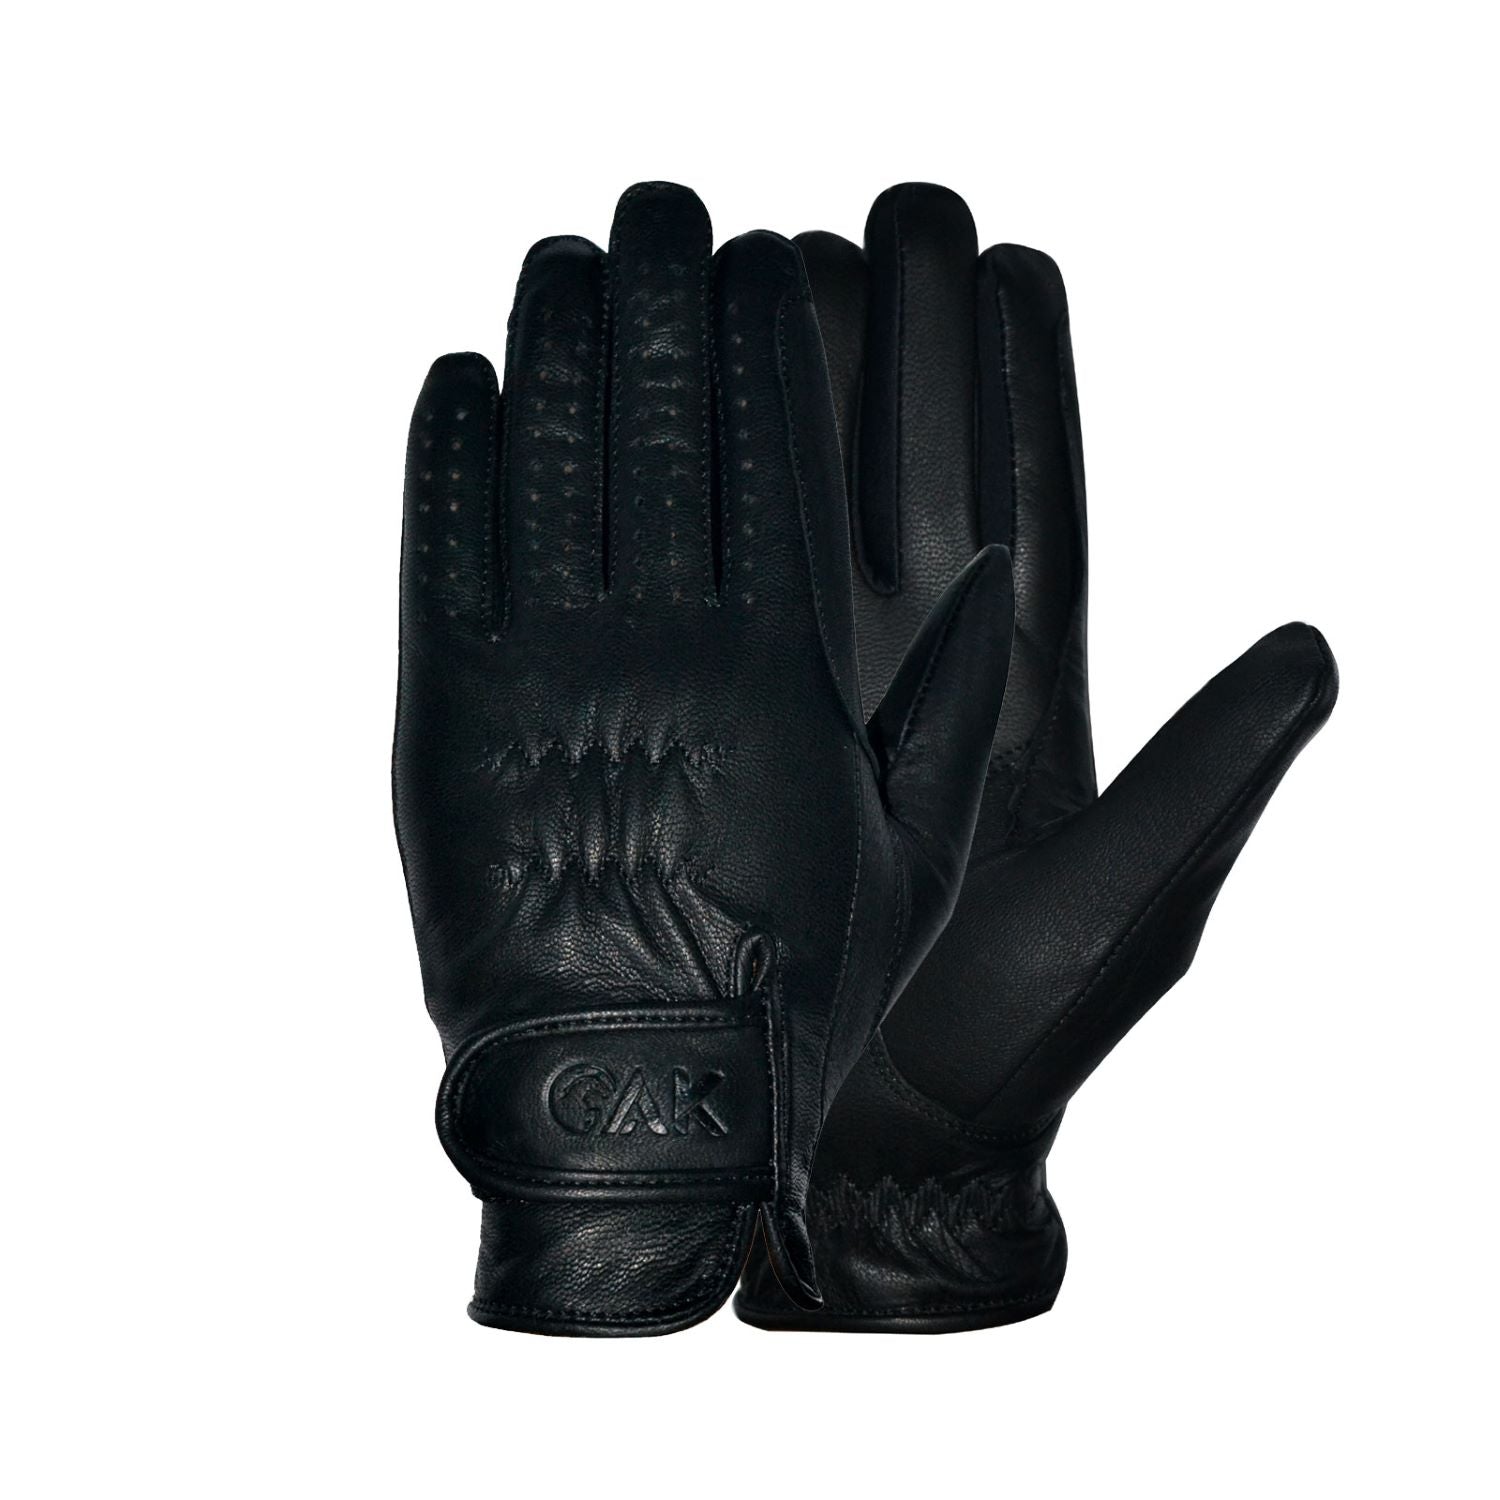 AK Classic Leather Riding Gloves